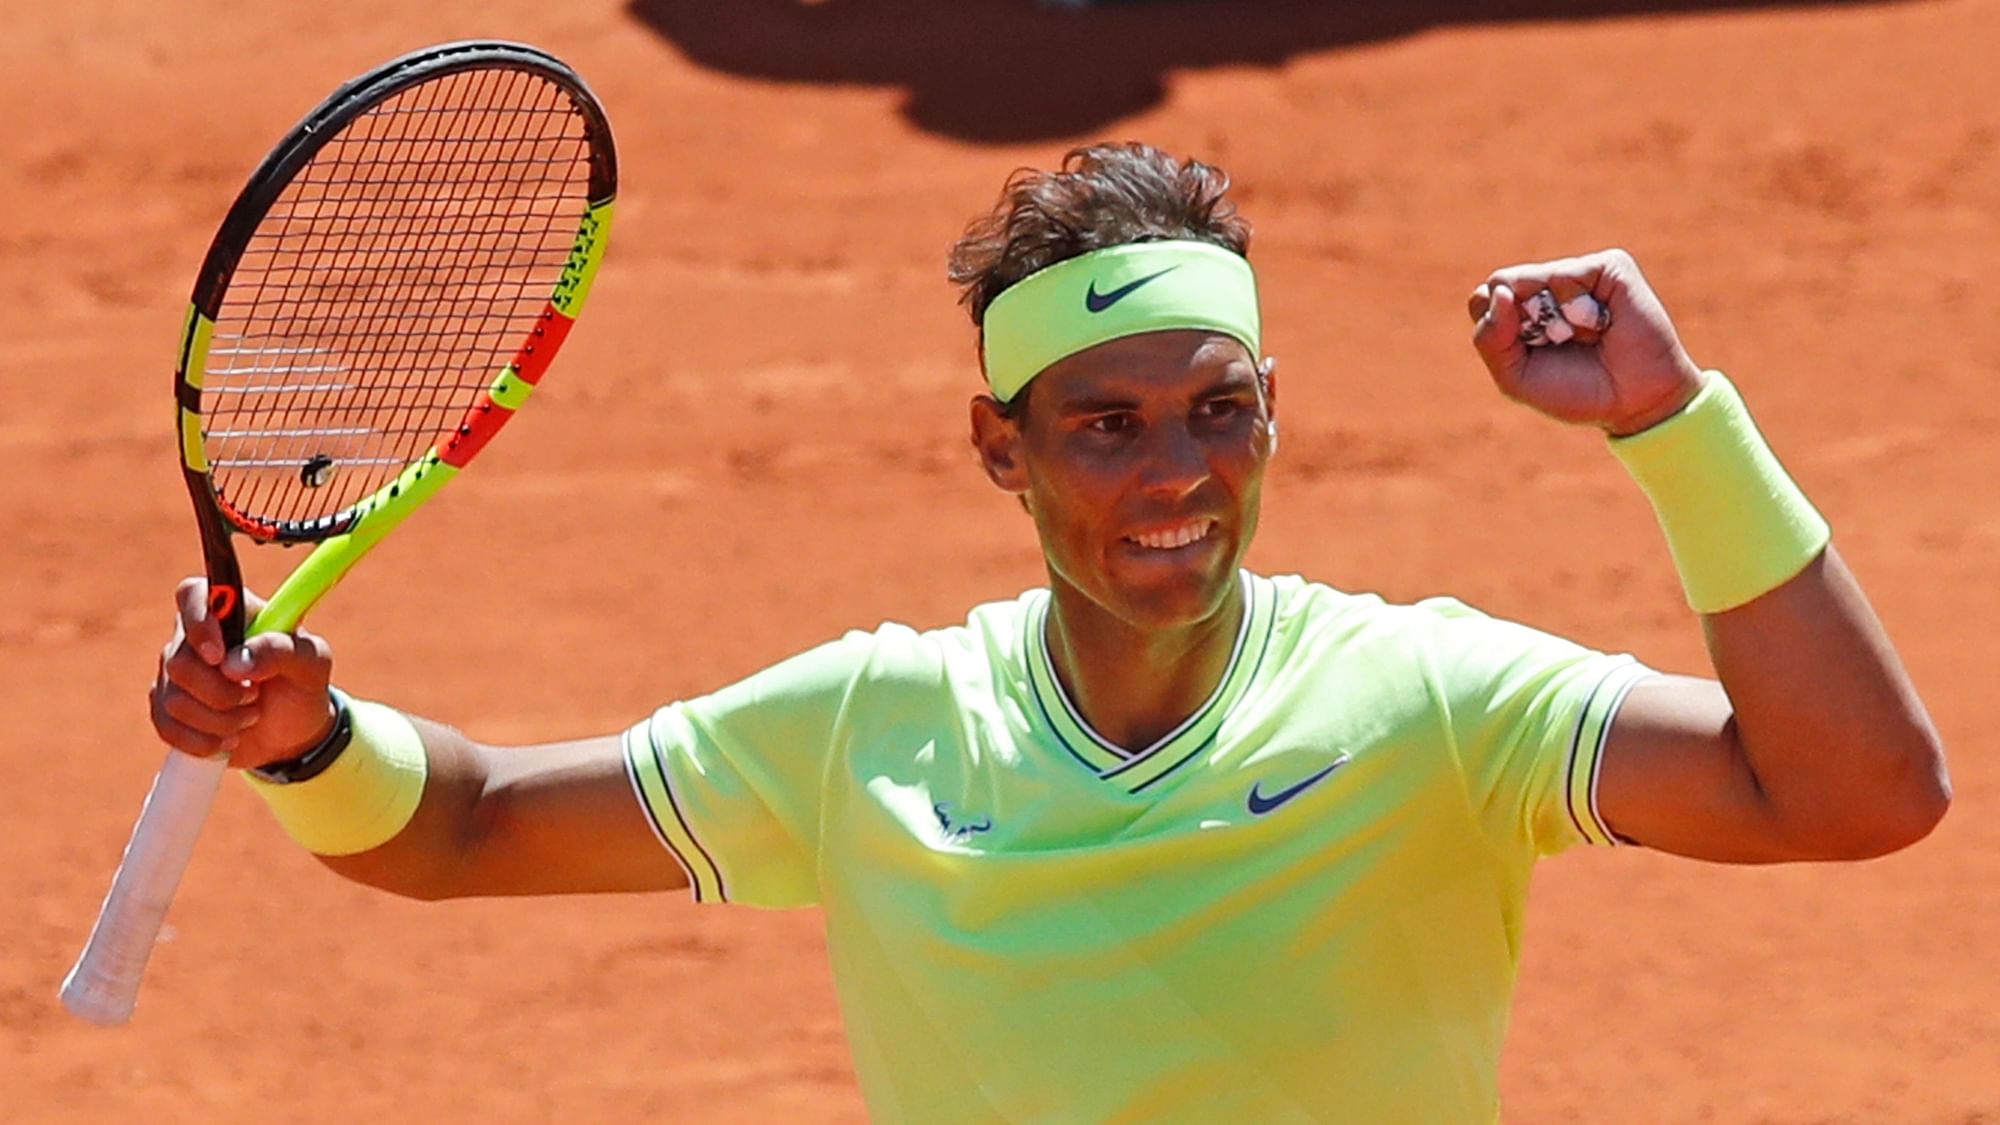 Rafael Nadal and Andy Murray are among 12 players confirmed to play in the virtual Madrid Open tennis tournament this month.